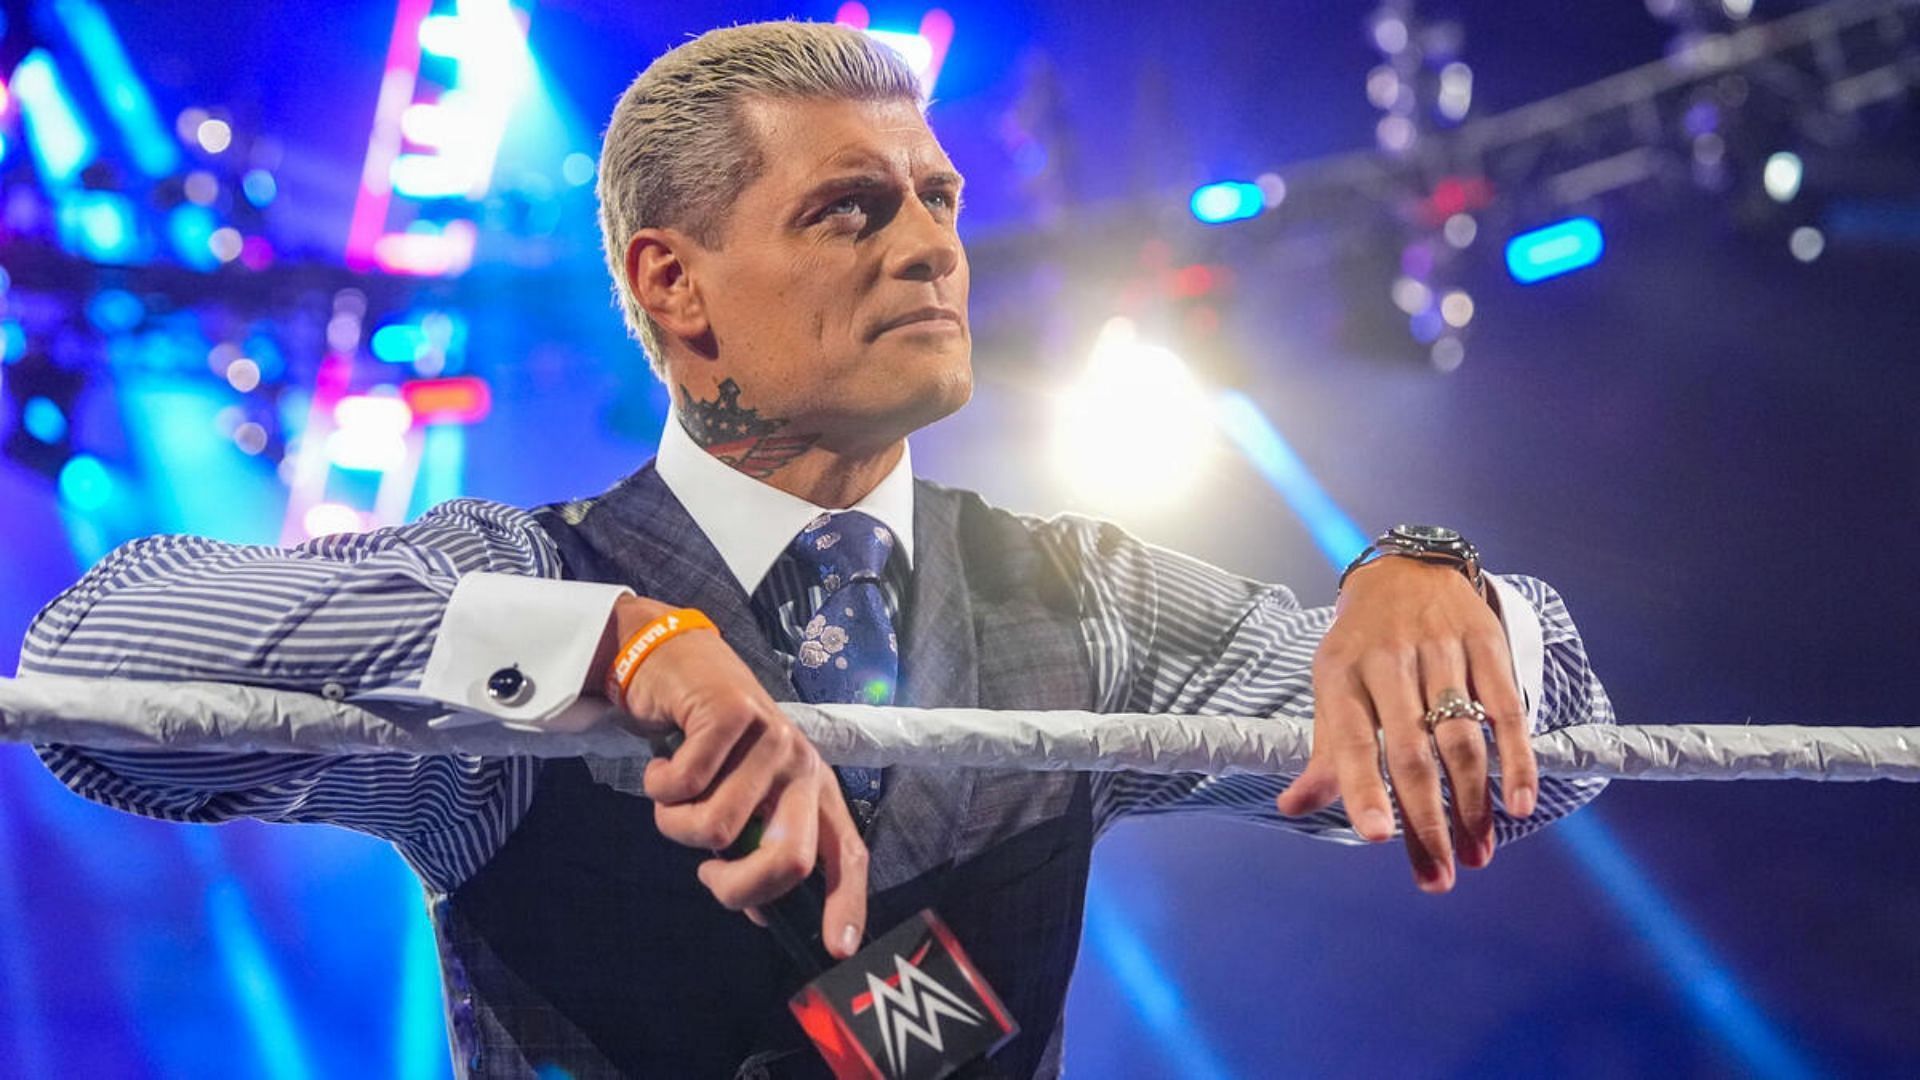 Cody Rhodes will main event WrestleMania this year [Photo courtesy of WWE